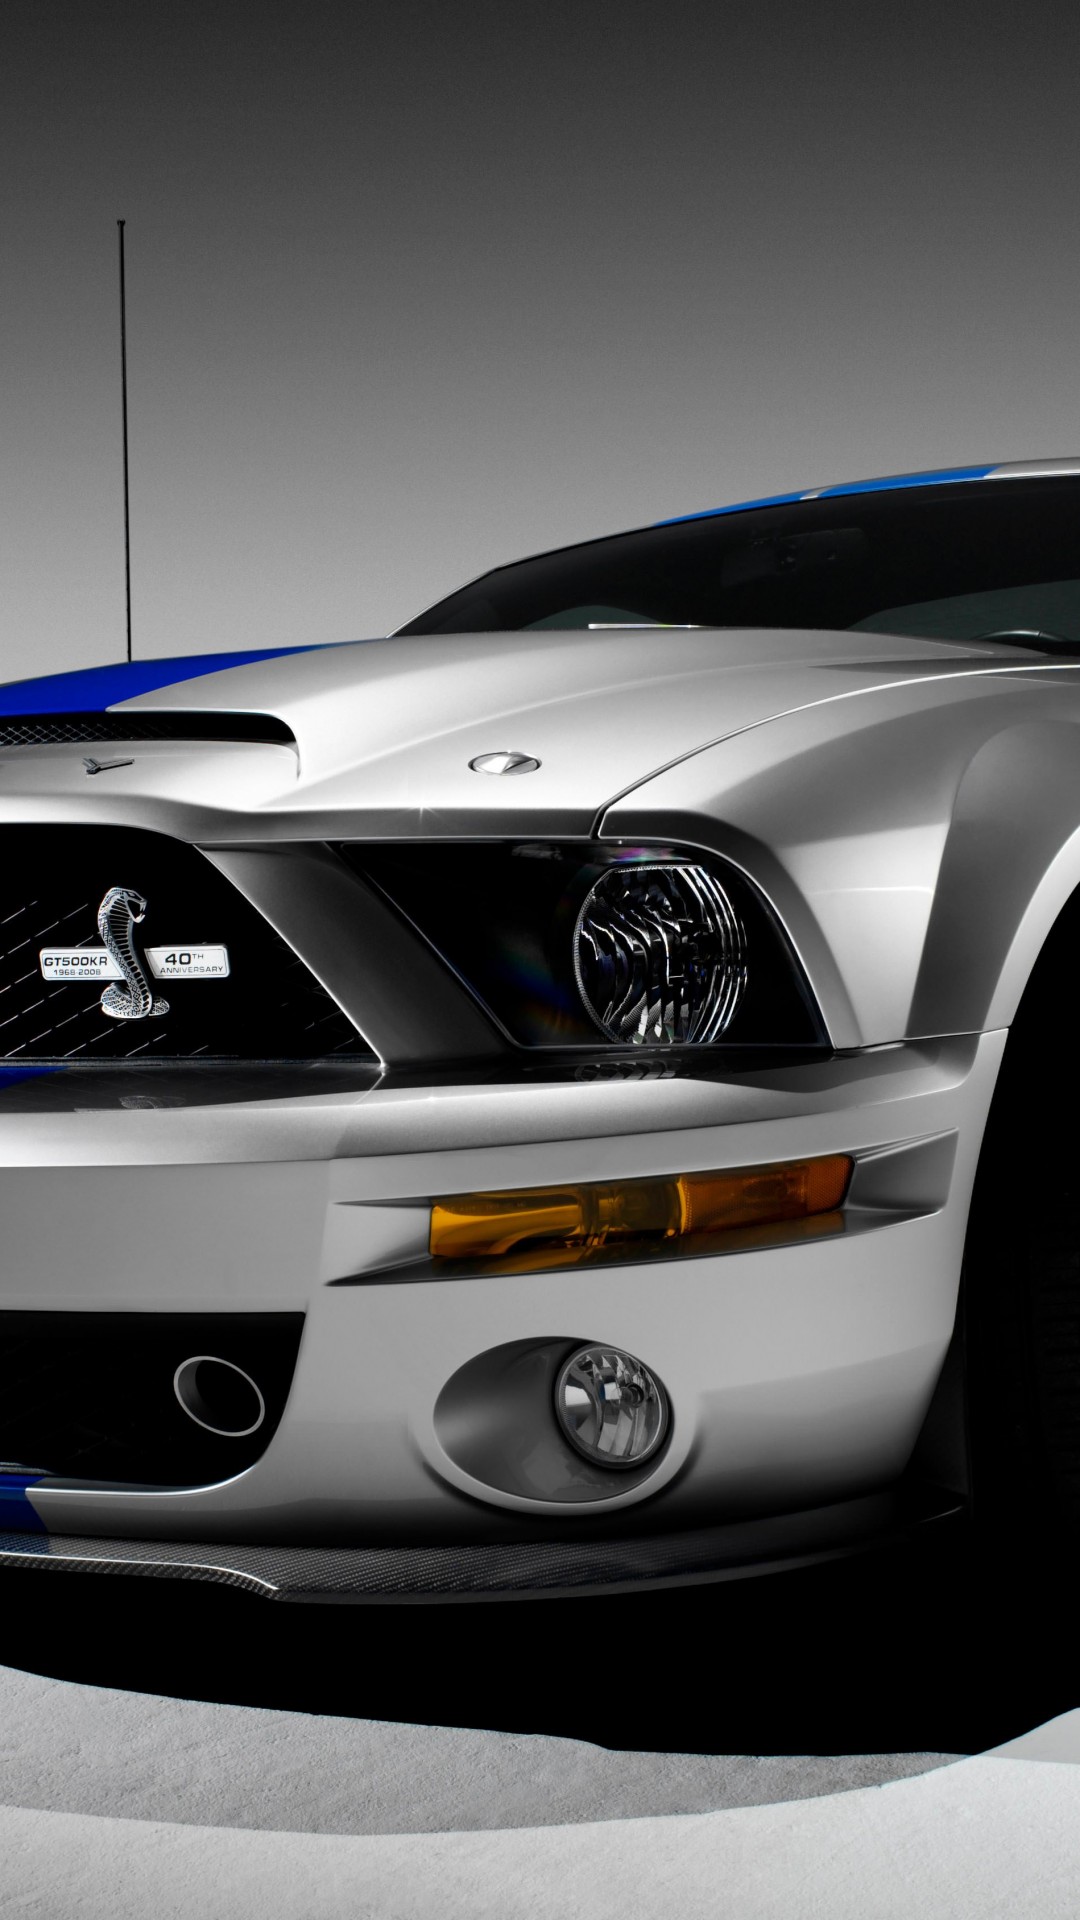 Shelby Mustang GT500KR Wallpaper for SONY Xperia Z2